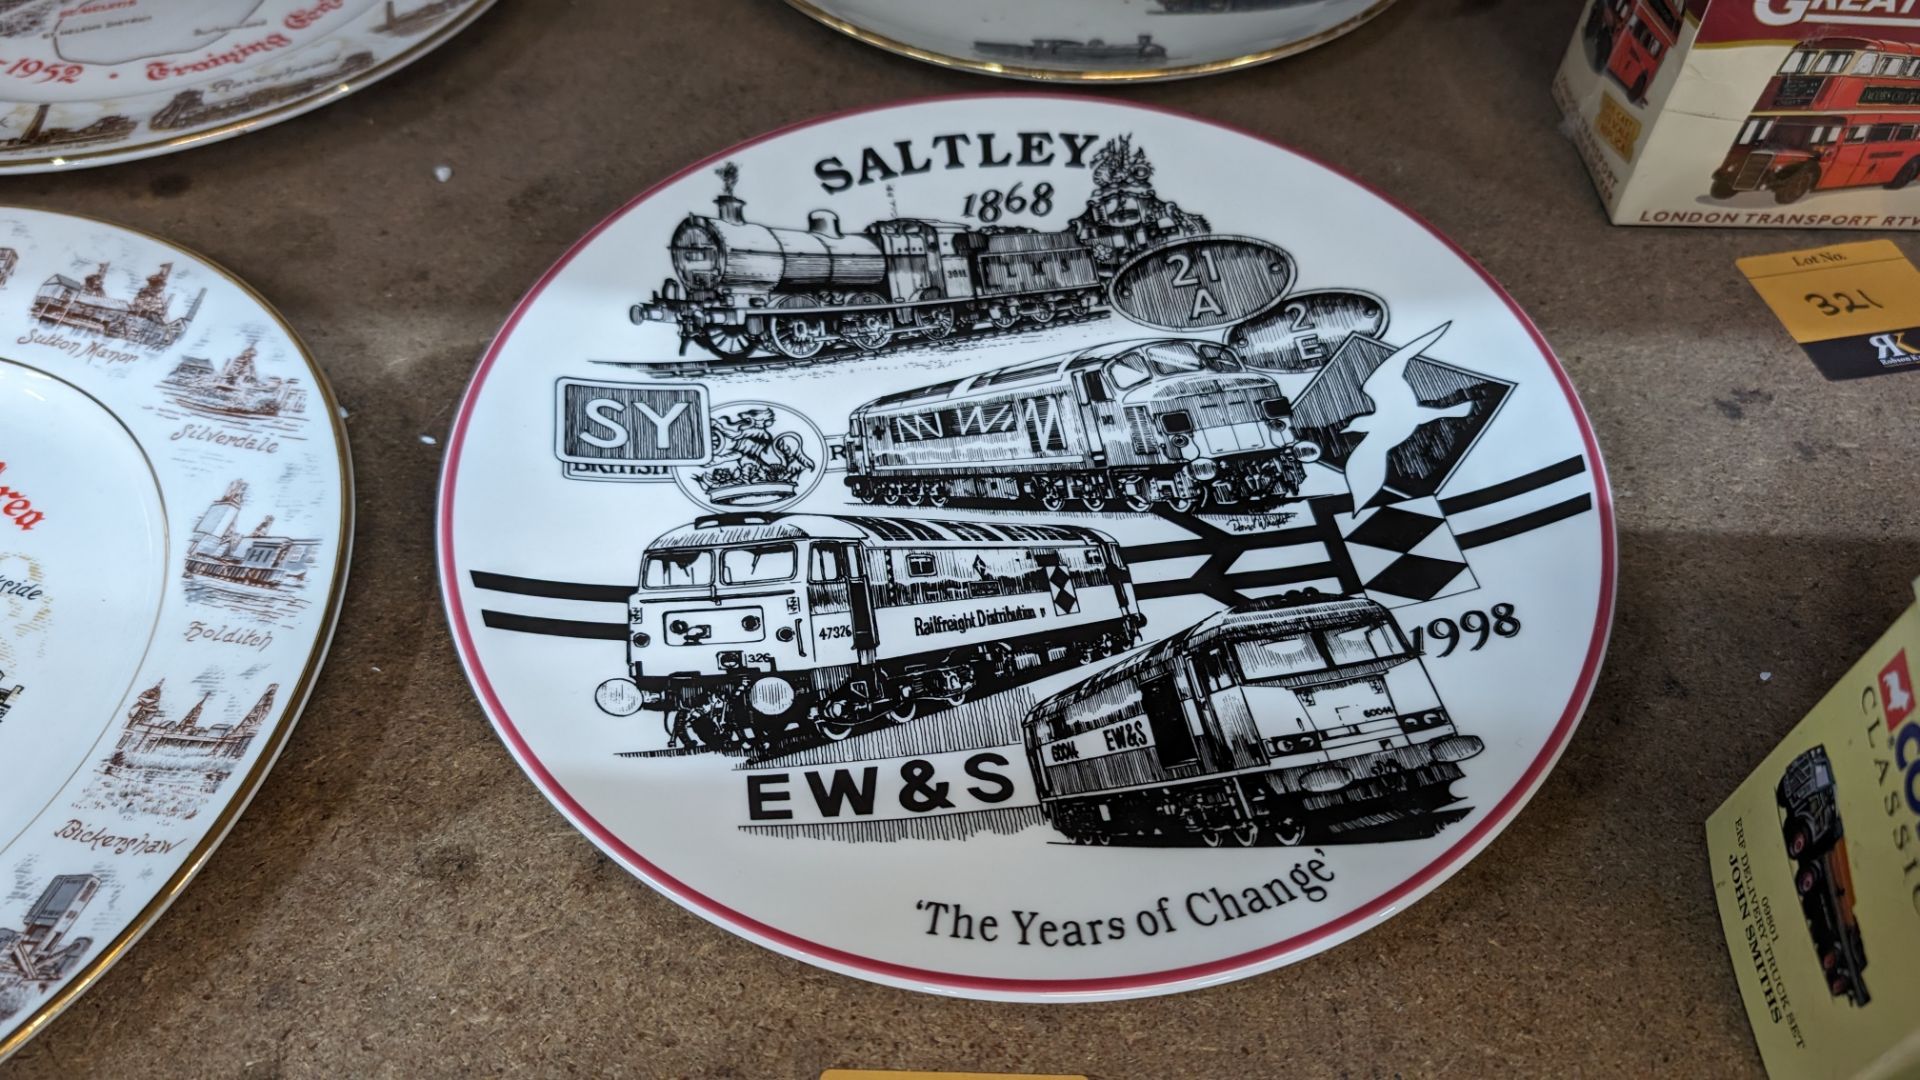 2 off railway related decorative plates, one plate being limited edition plate 269 - Image 3 of 6